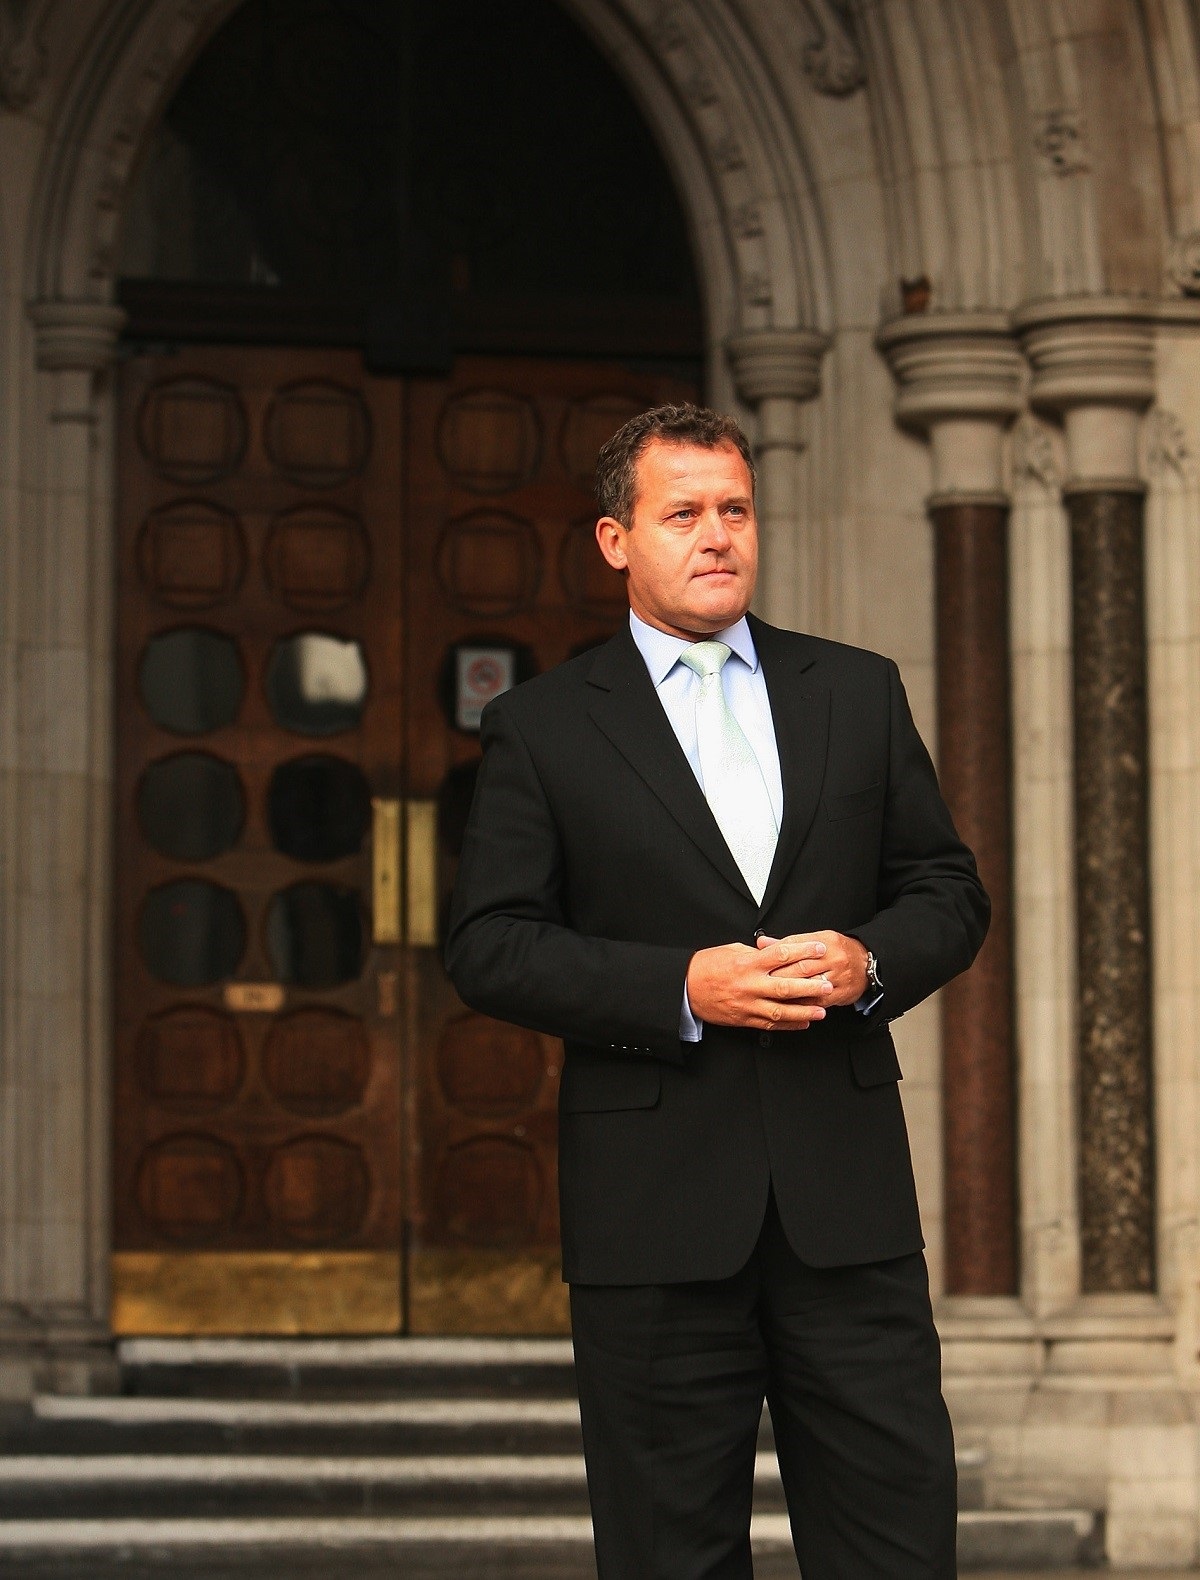 Paul Burrell, the former butler of Princess Diana, poses for the press outside the High Court in London